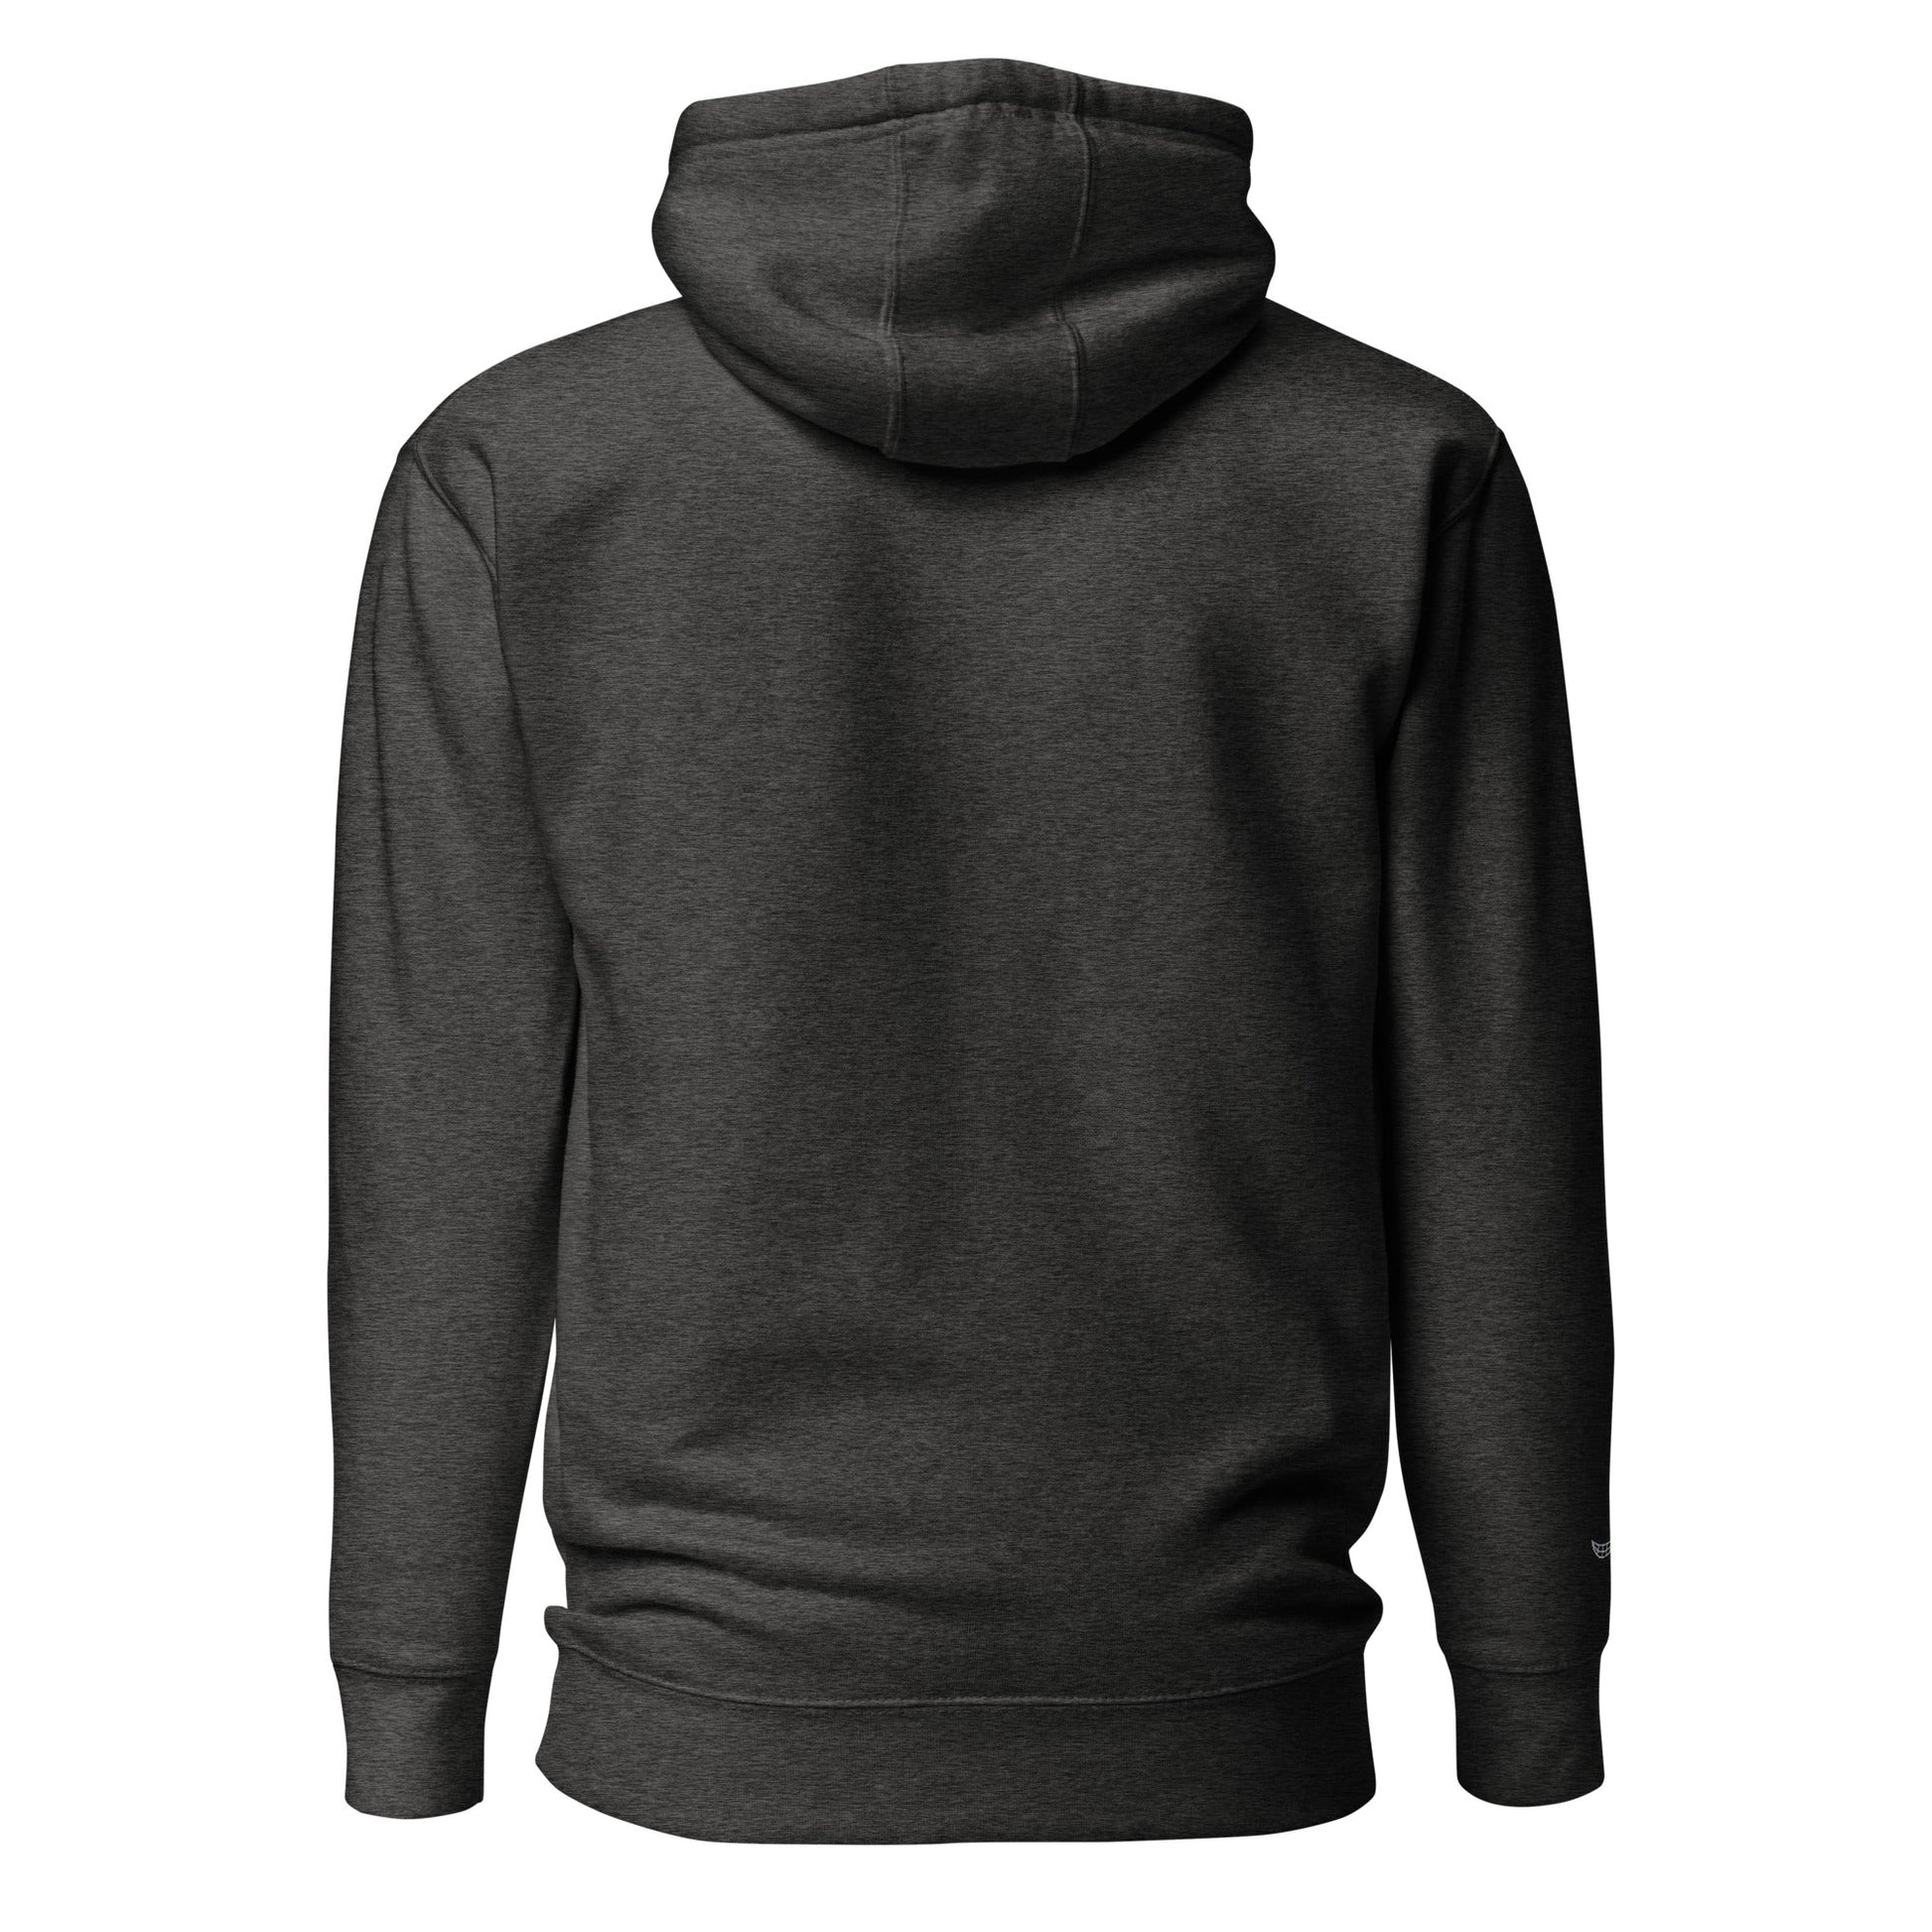 Professional Attention Seeker Unisex Hoodie - chucklecouture co.